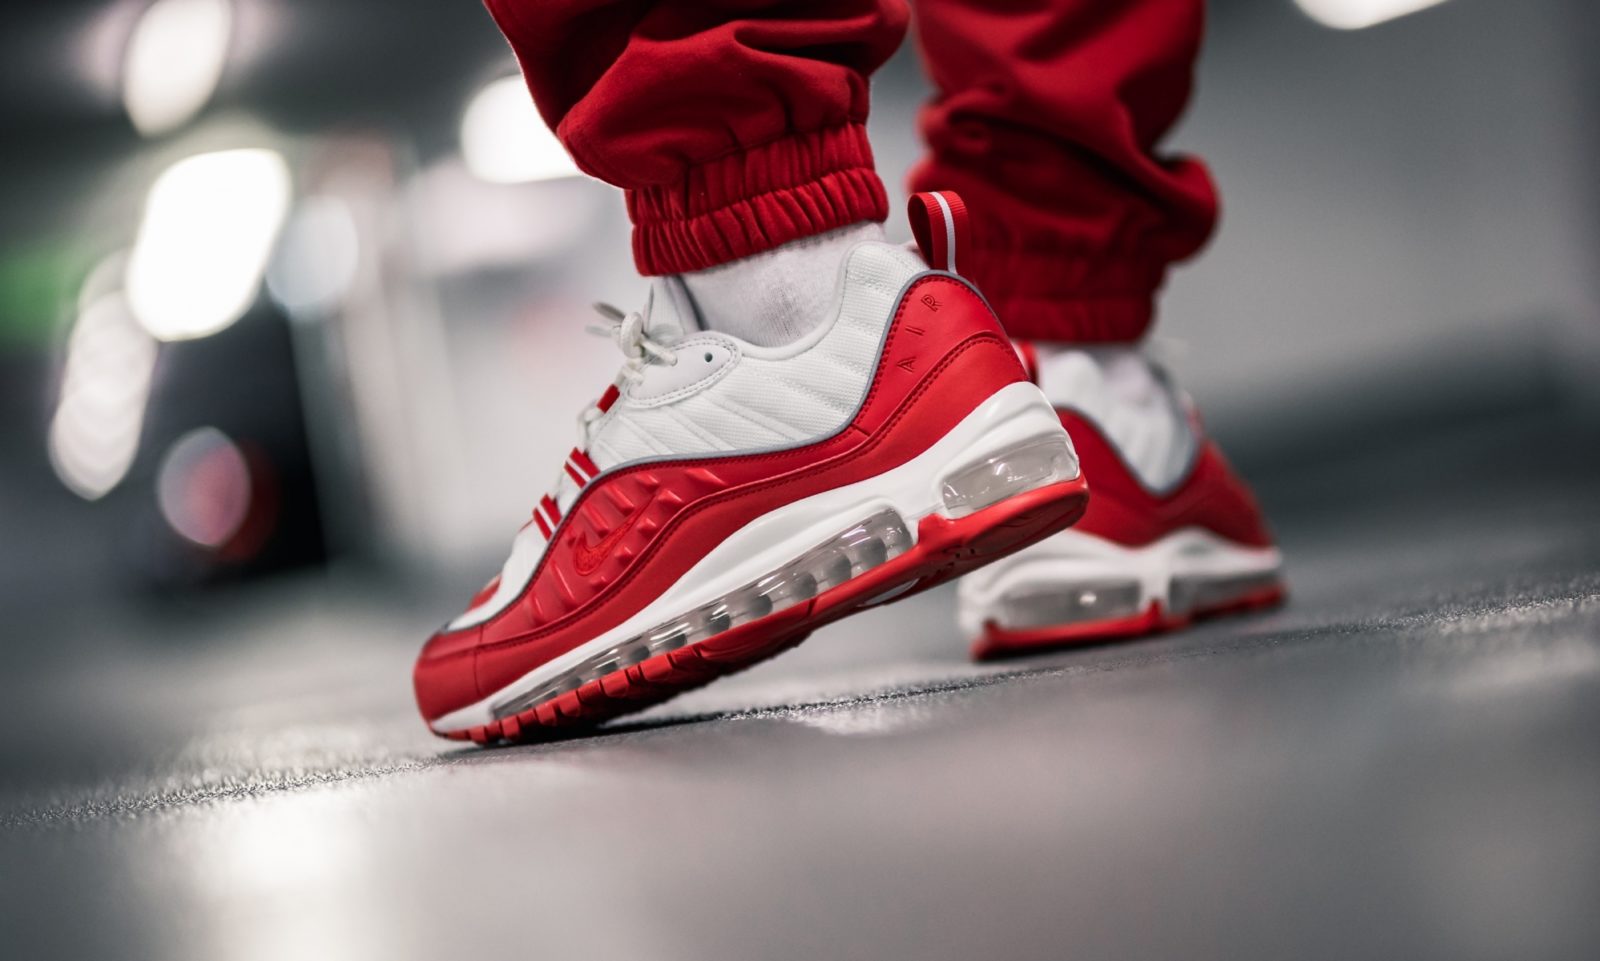 air max 98 university red on feet